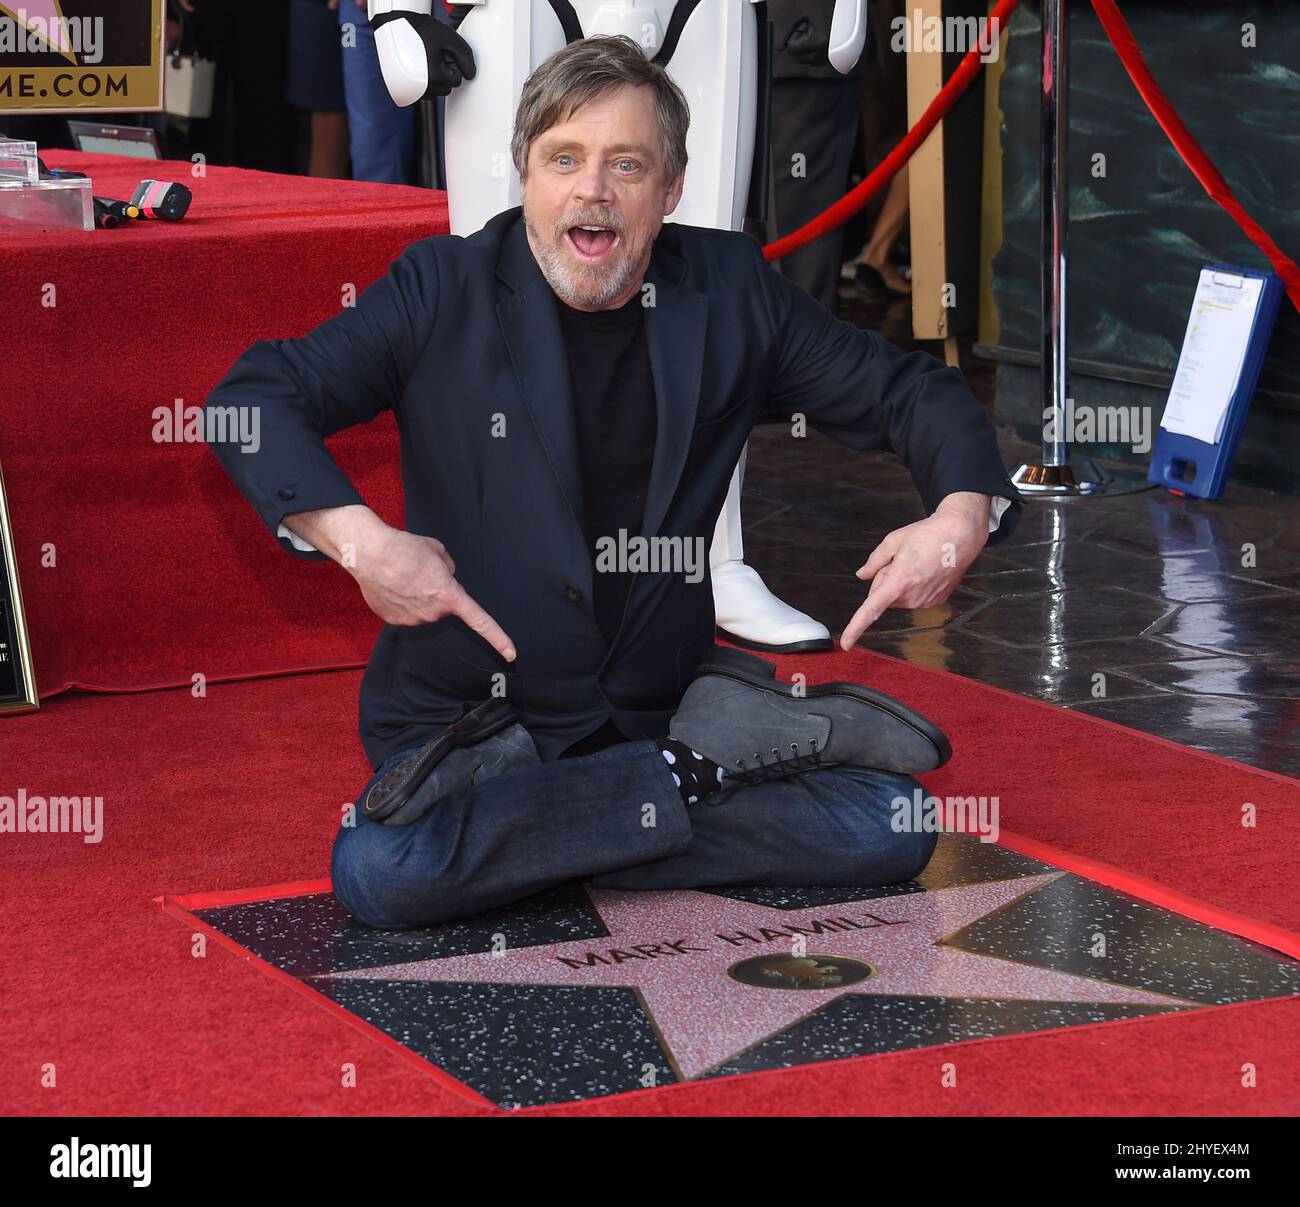 Mark Hamill at the Mark Hamill Hollywood Walk of Fame star ceremony held on Hollywood Blvd on March 8th, 2018 Stock Photo